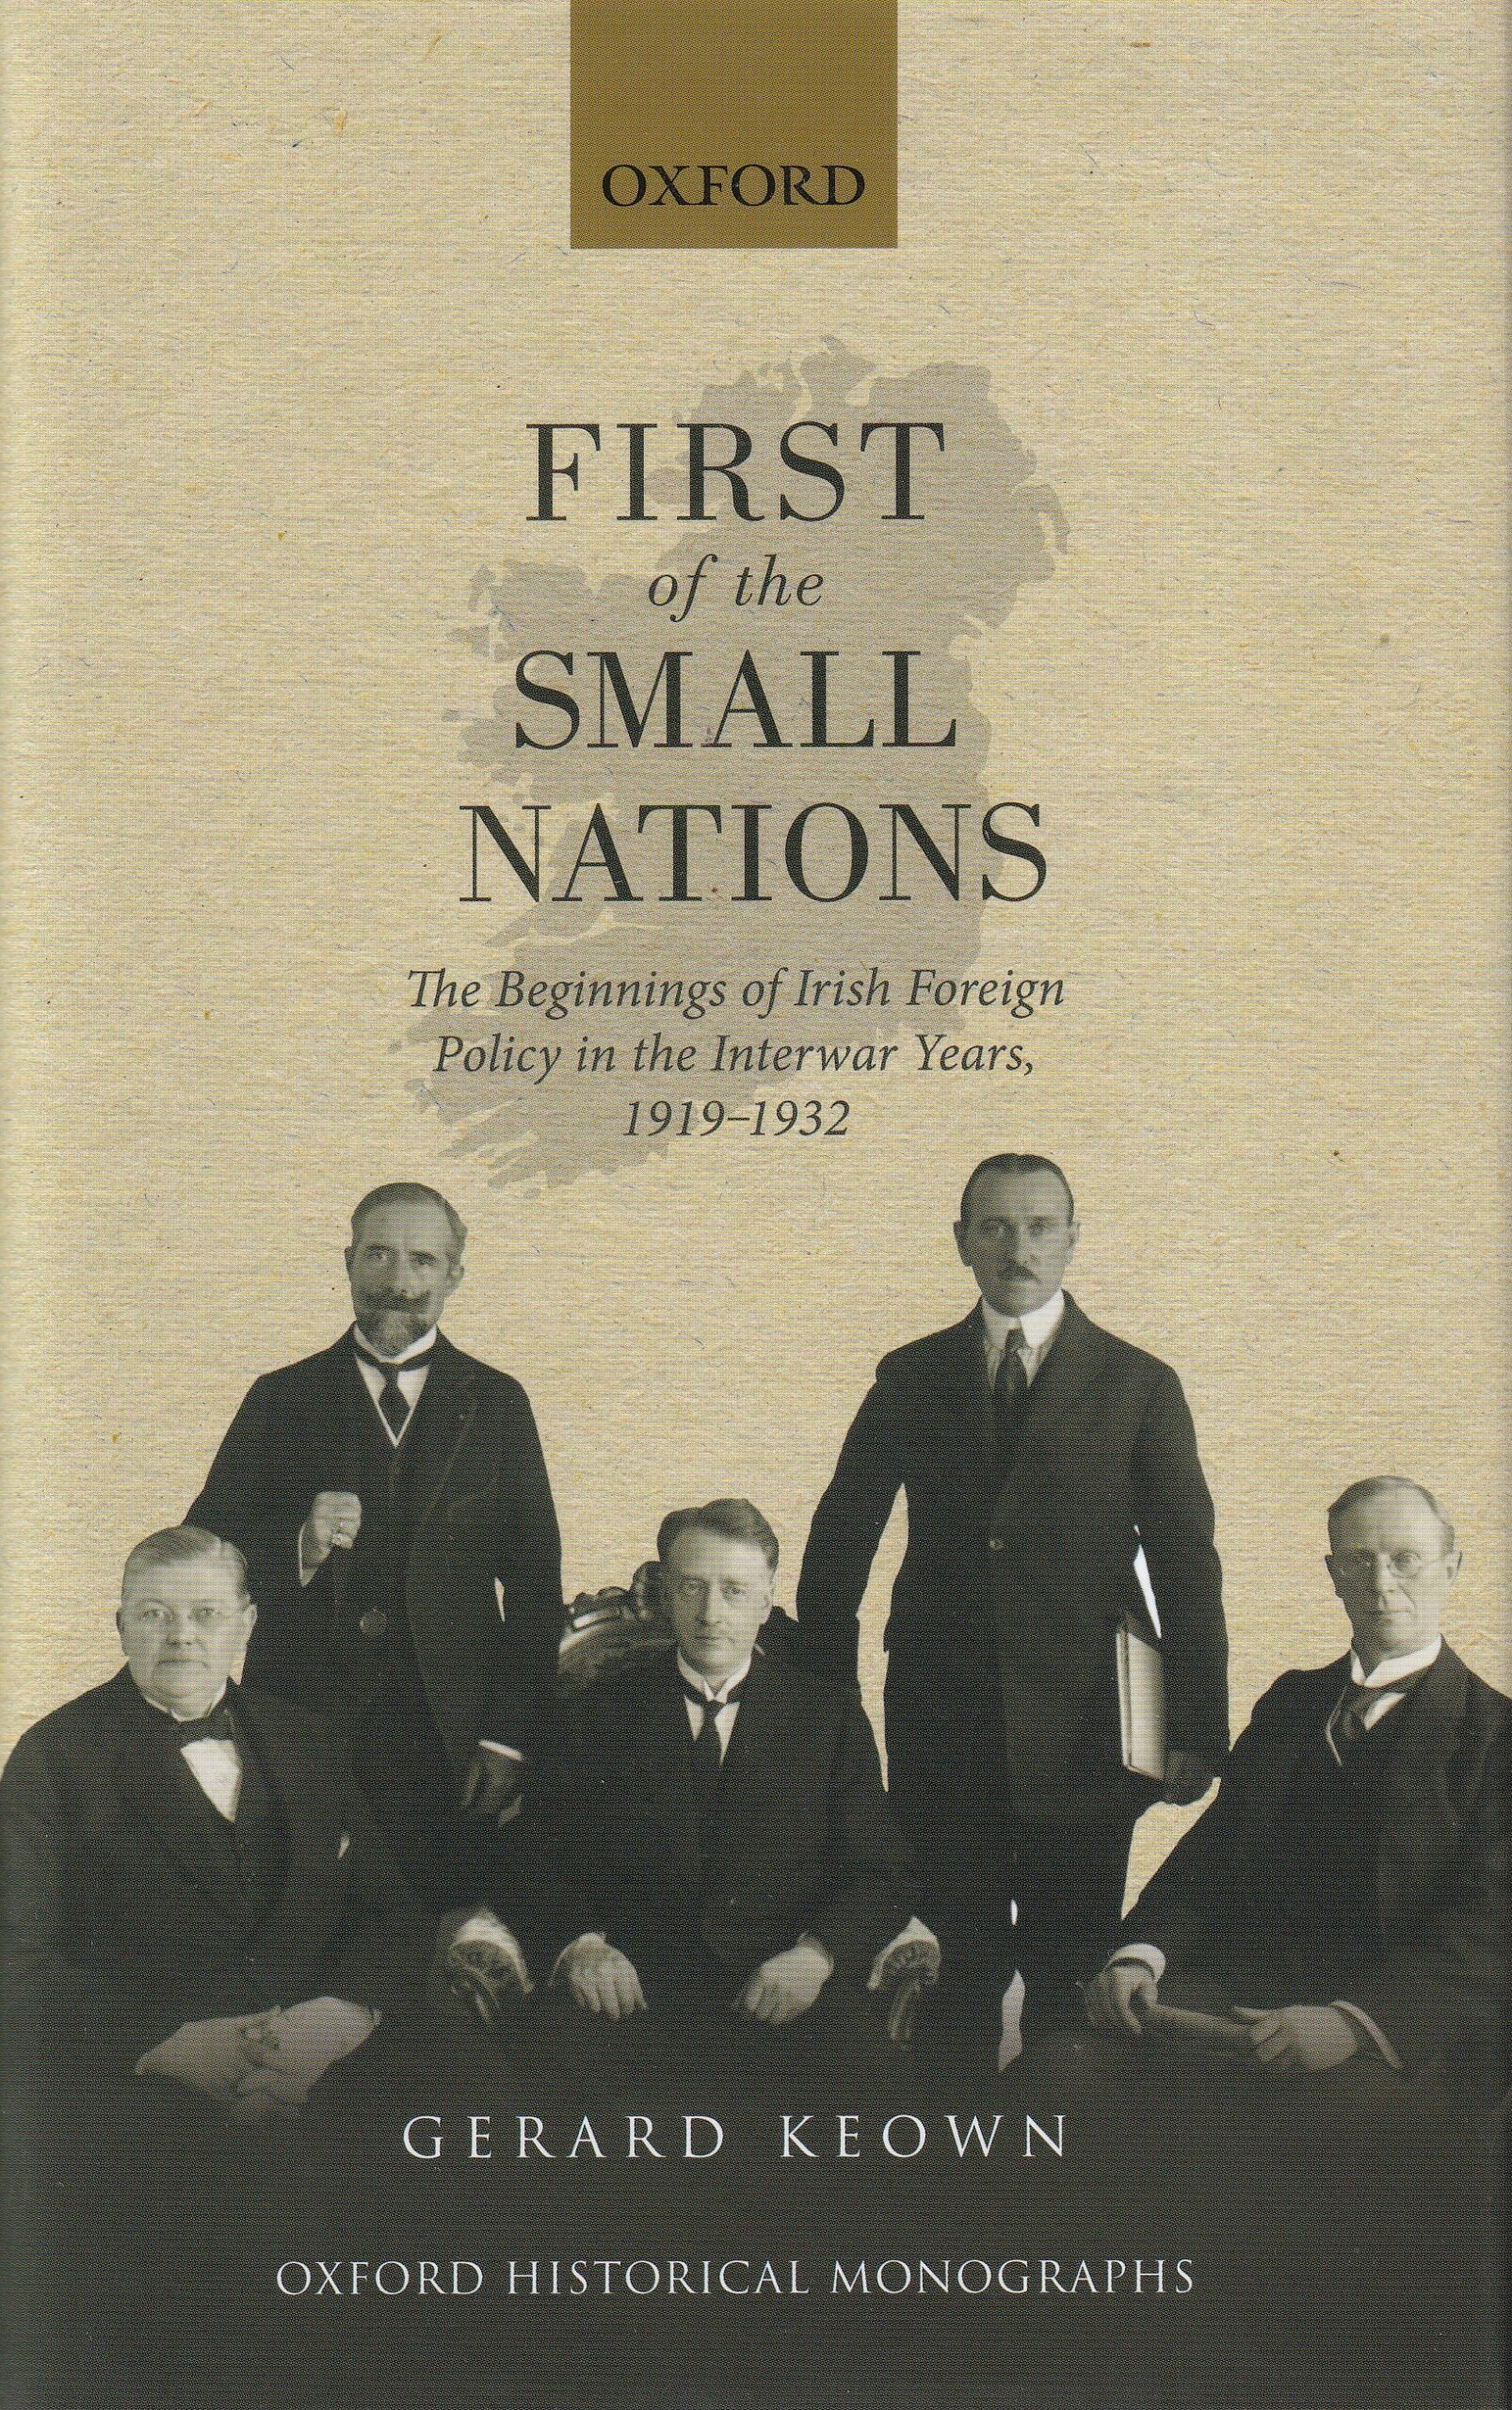 First of the Small Nations: The Beginnings of Irish Foreign Policy in the Interwar Years, 1919-1932 by Gerard Keown